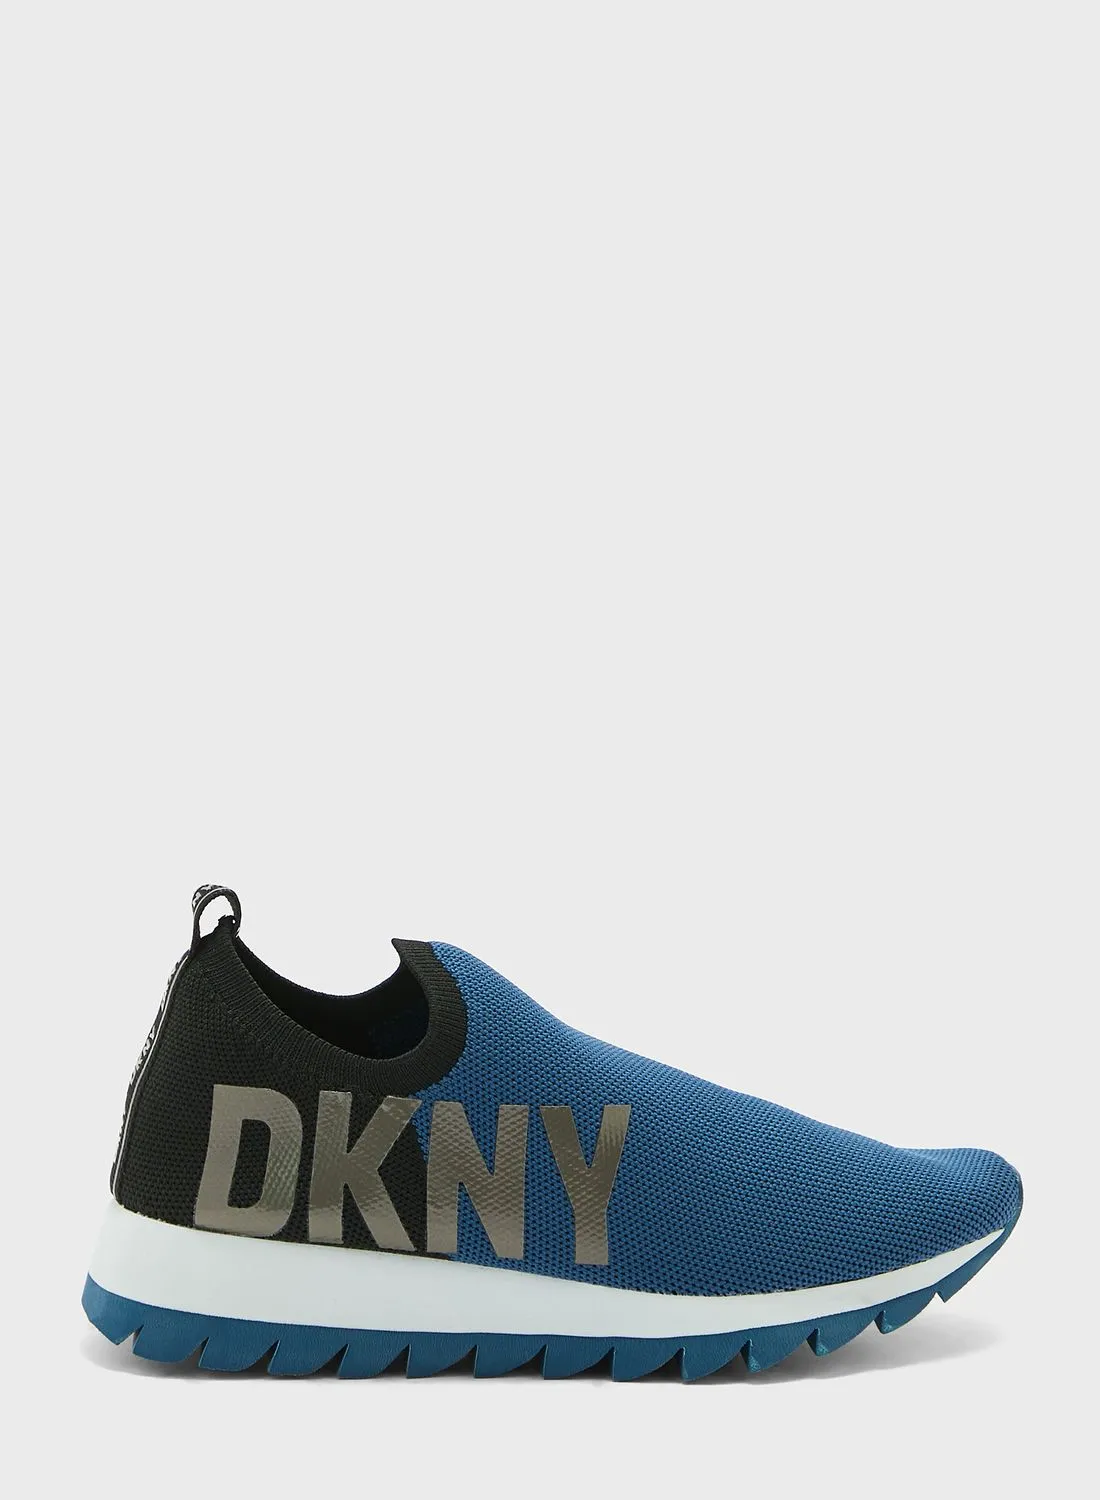 DKNY Azer  Low Top Sneakers